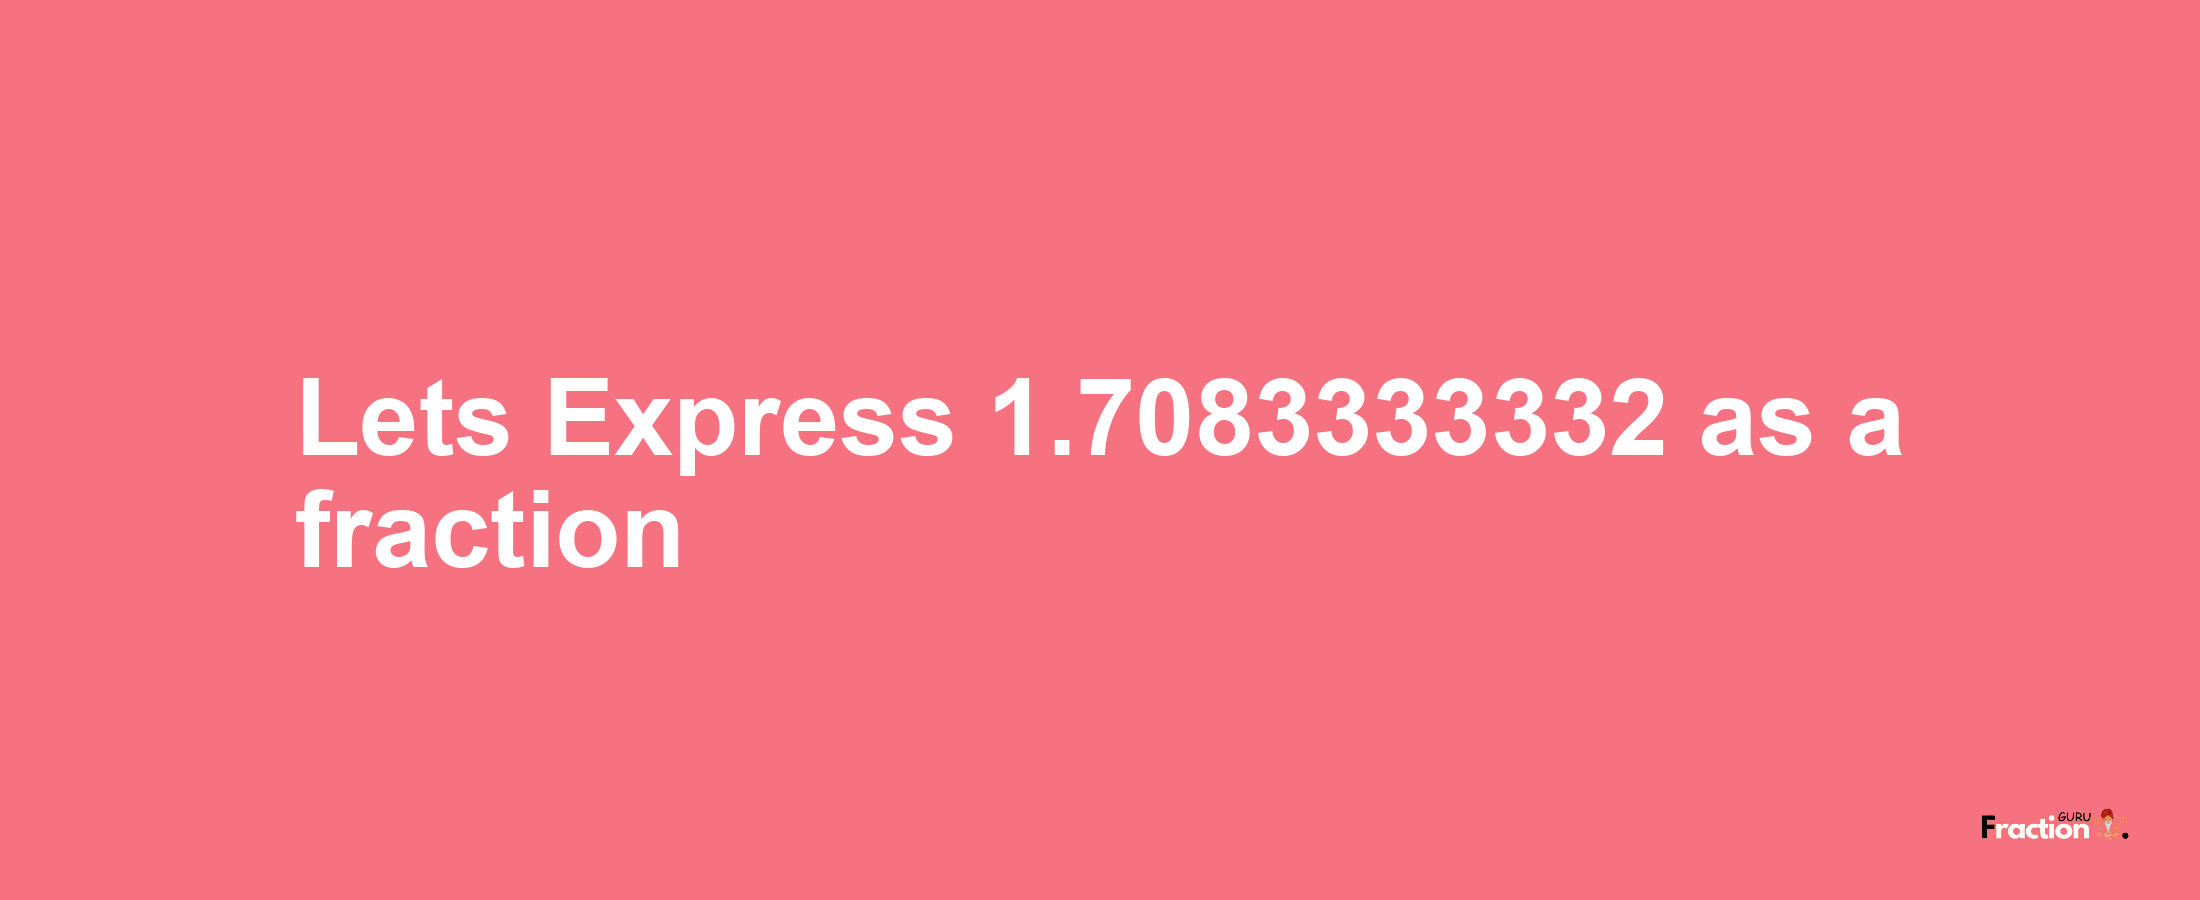 Lets Express 1.7083333332 as afraction